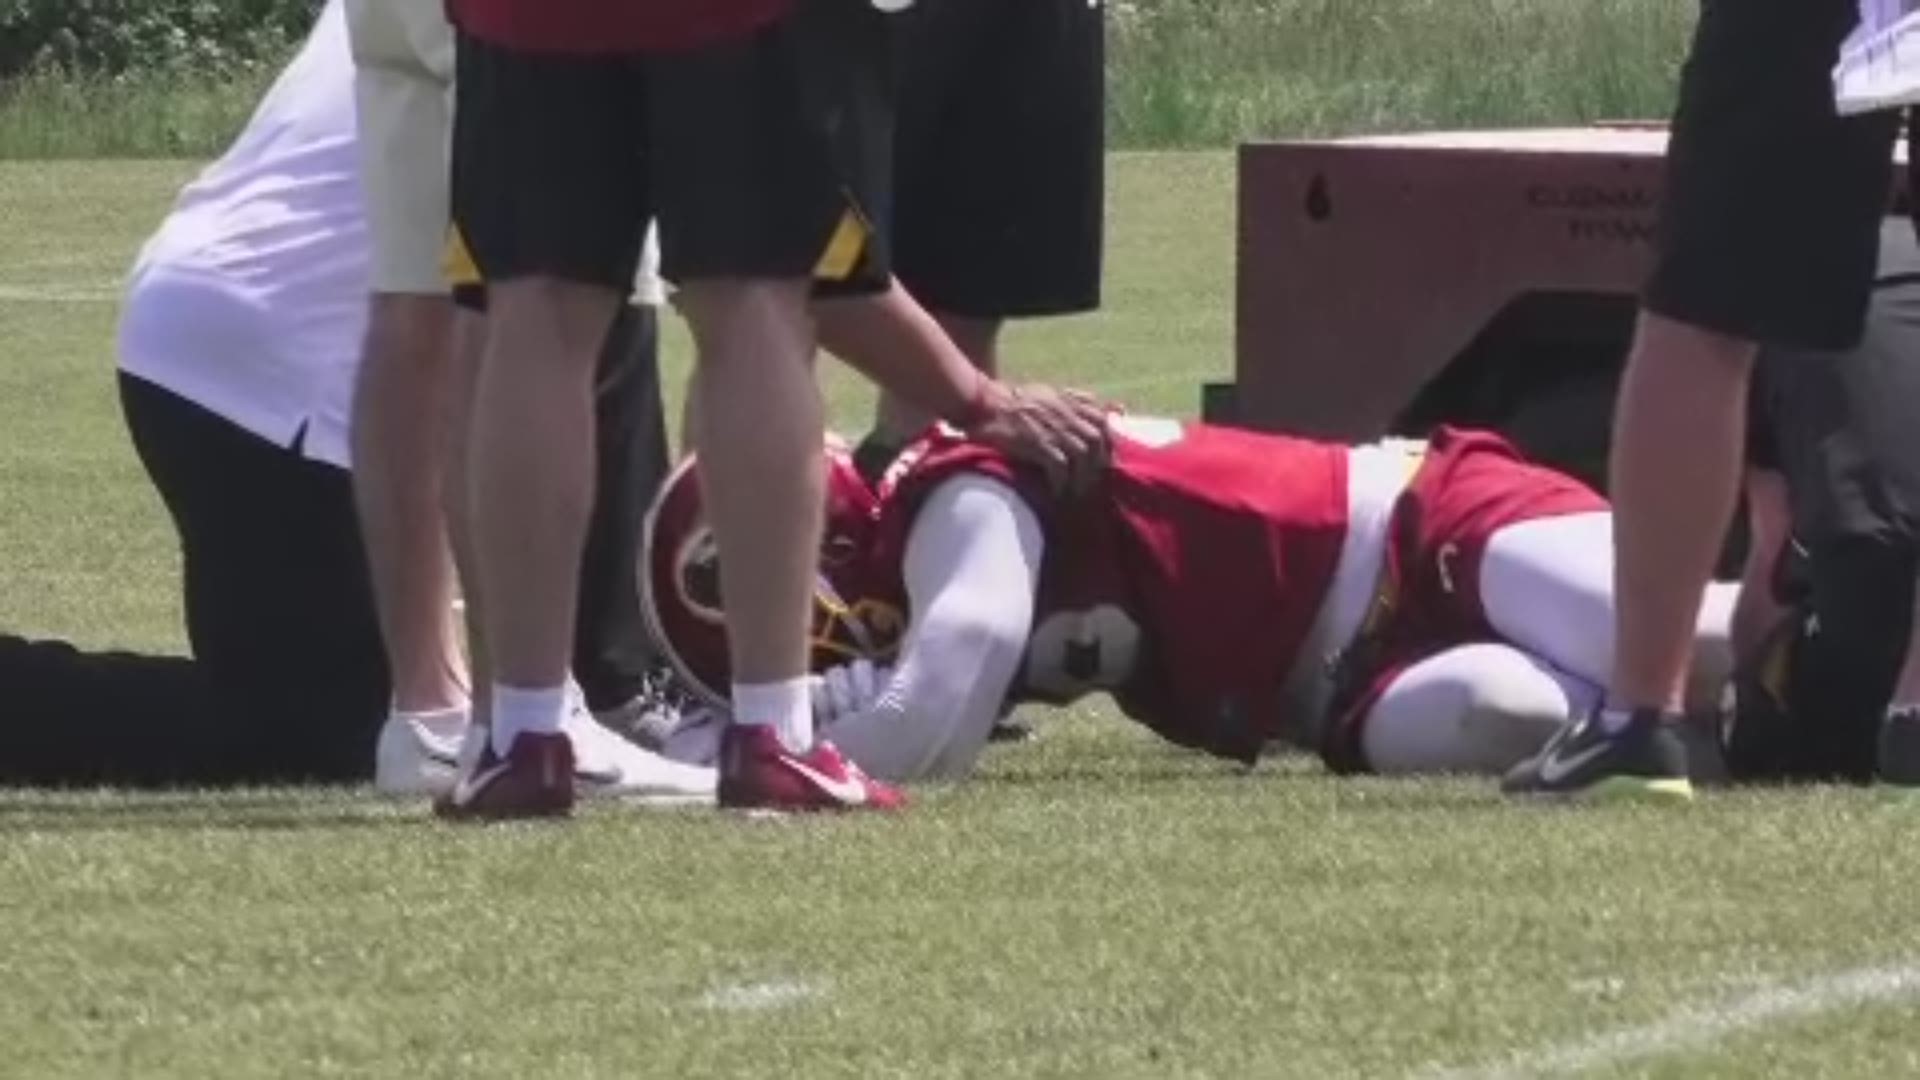 Third play of the Redskins' practice and Reuben Foster screamed in pain, grabbed his left knee and fell to the ground. The linebacker was carted off the field, crying. Foster reportedly tore his ACL, according to a tweet from Ian Rapoport.